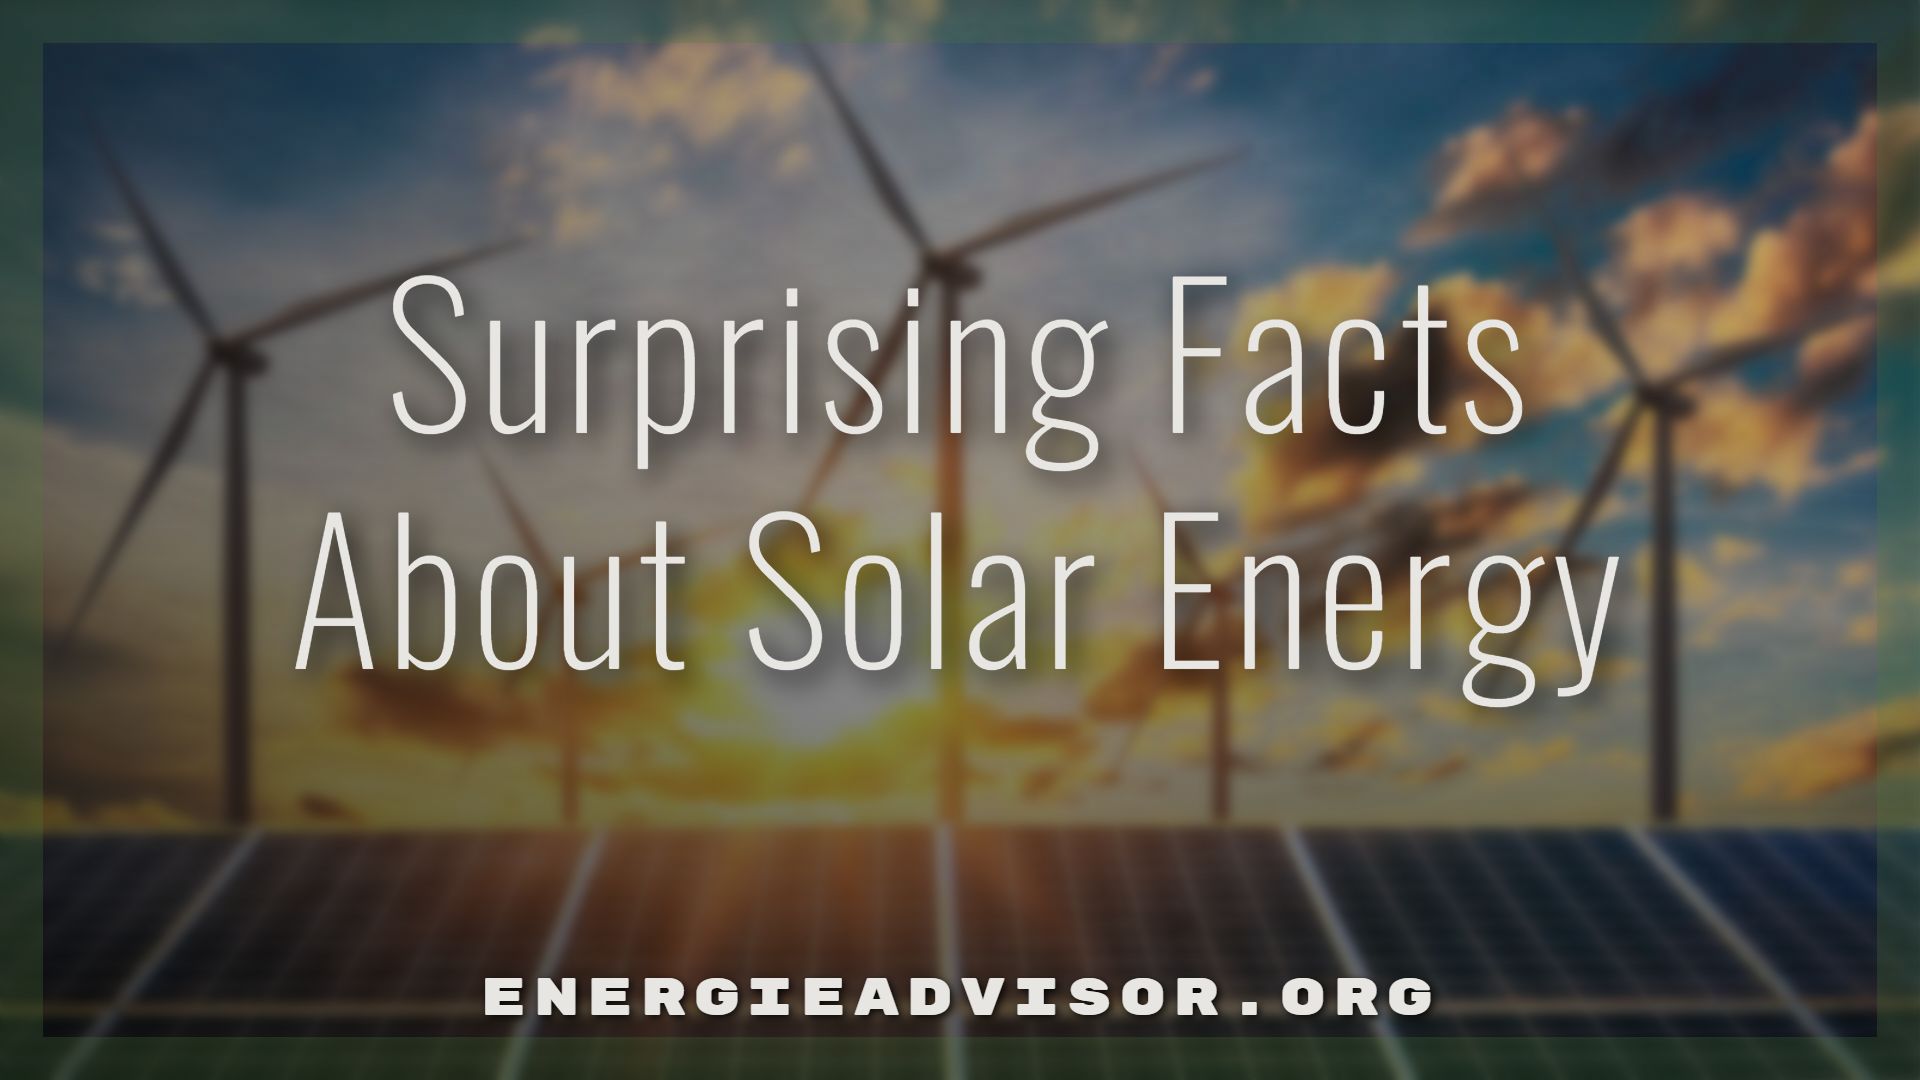 Top 10 Surprising Facts About Solar Energy